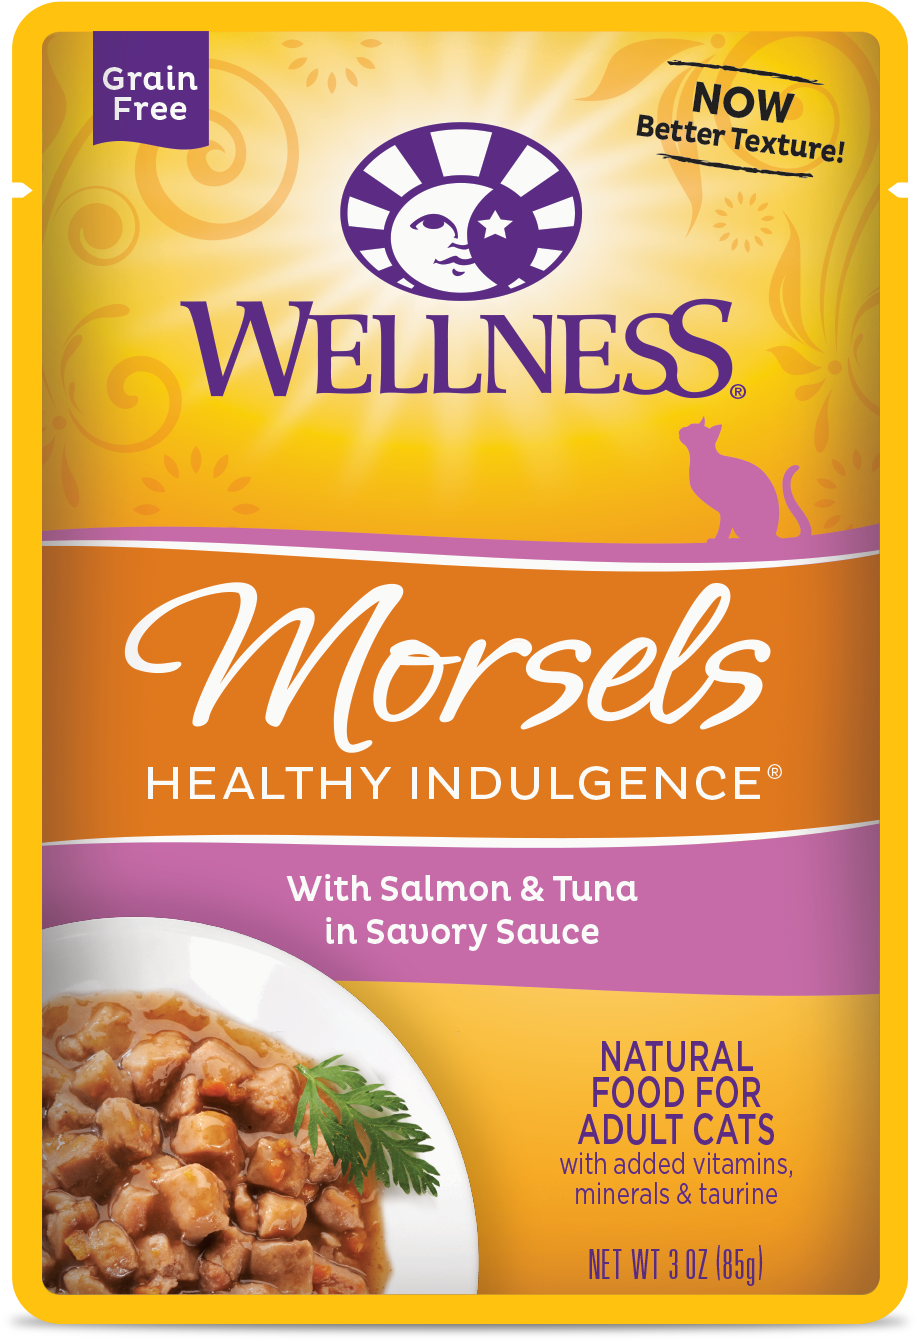 Healthy Indulgence® Morsels - Wellness Healthy Indulgence (2000x2000), Png Download